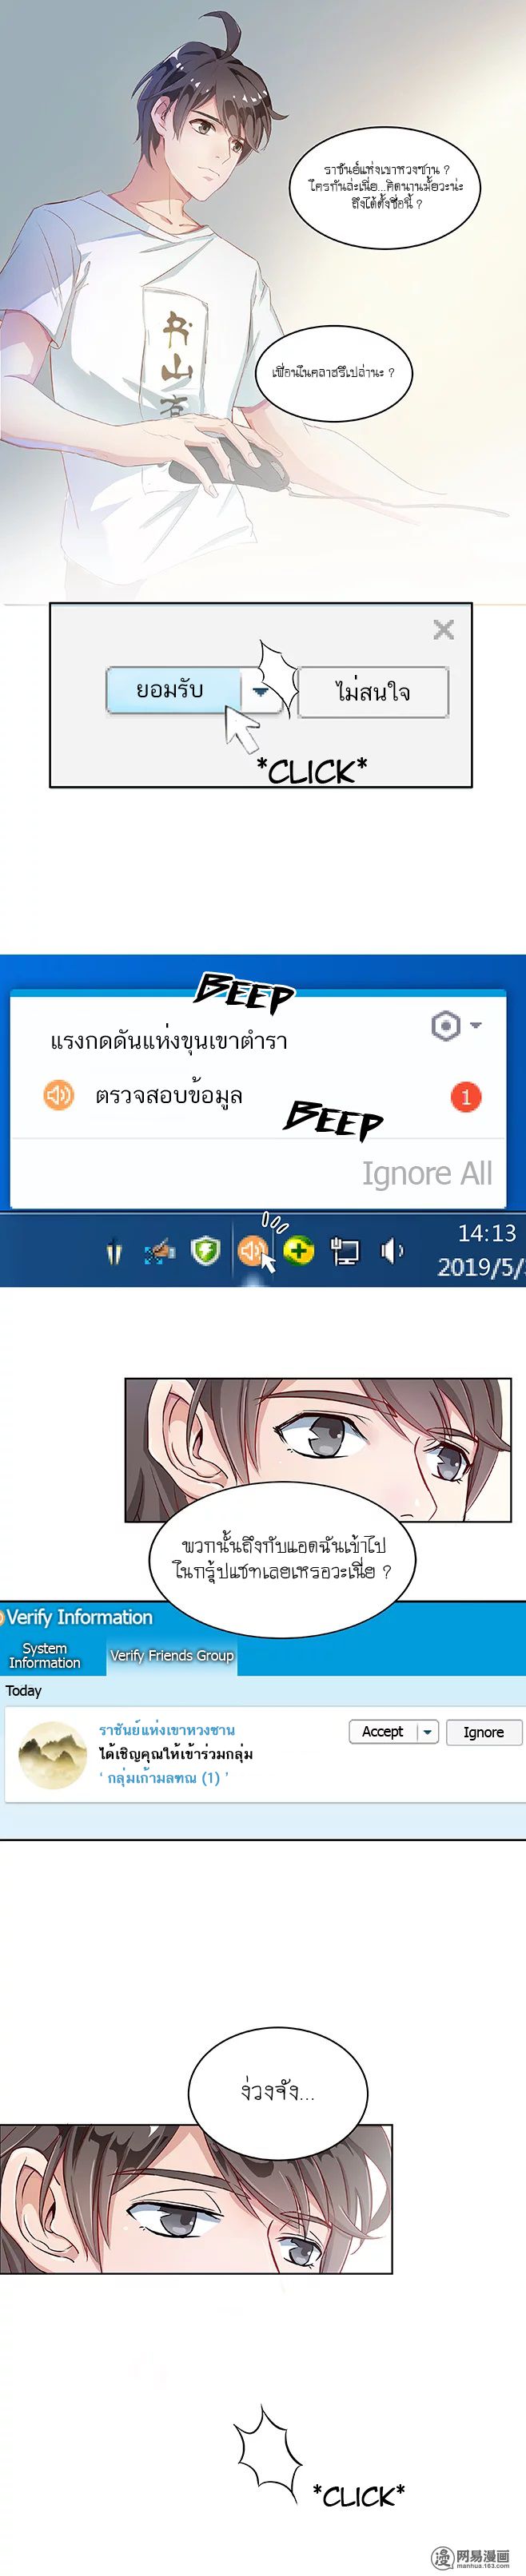 Cultivation Chat Group - หน้า 3